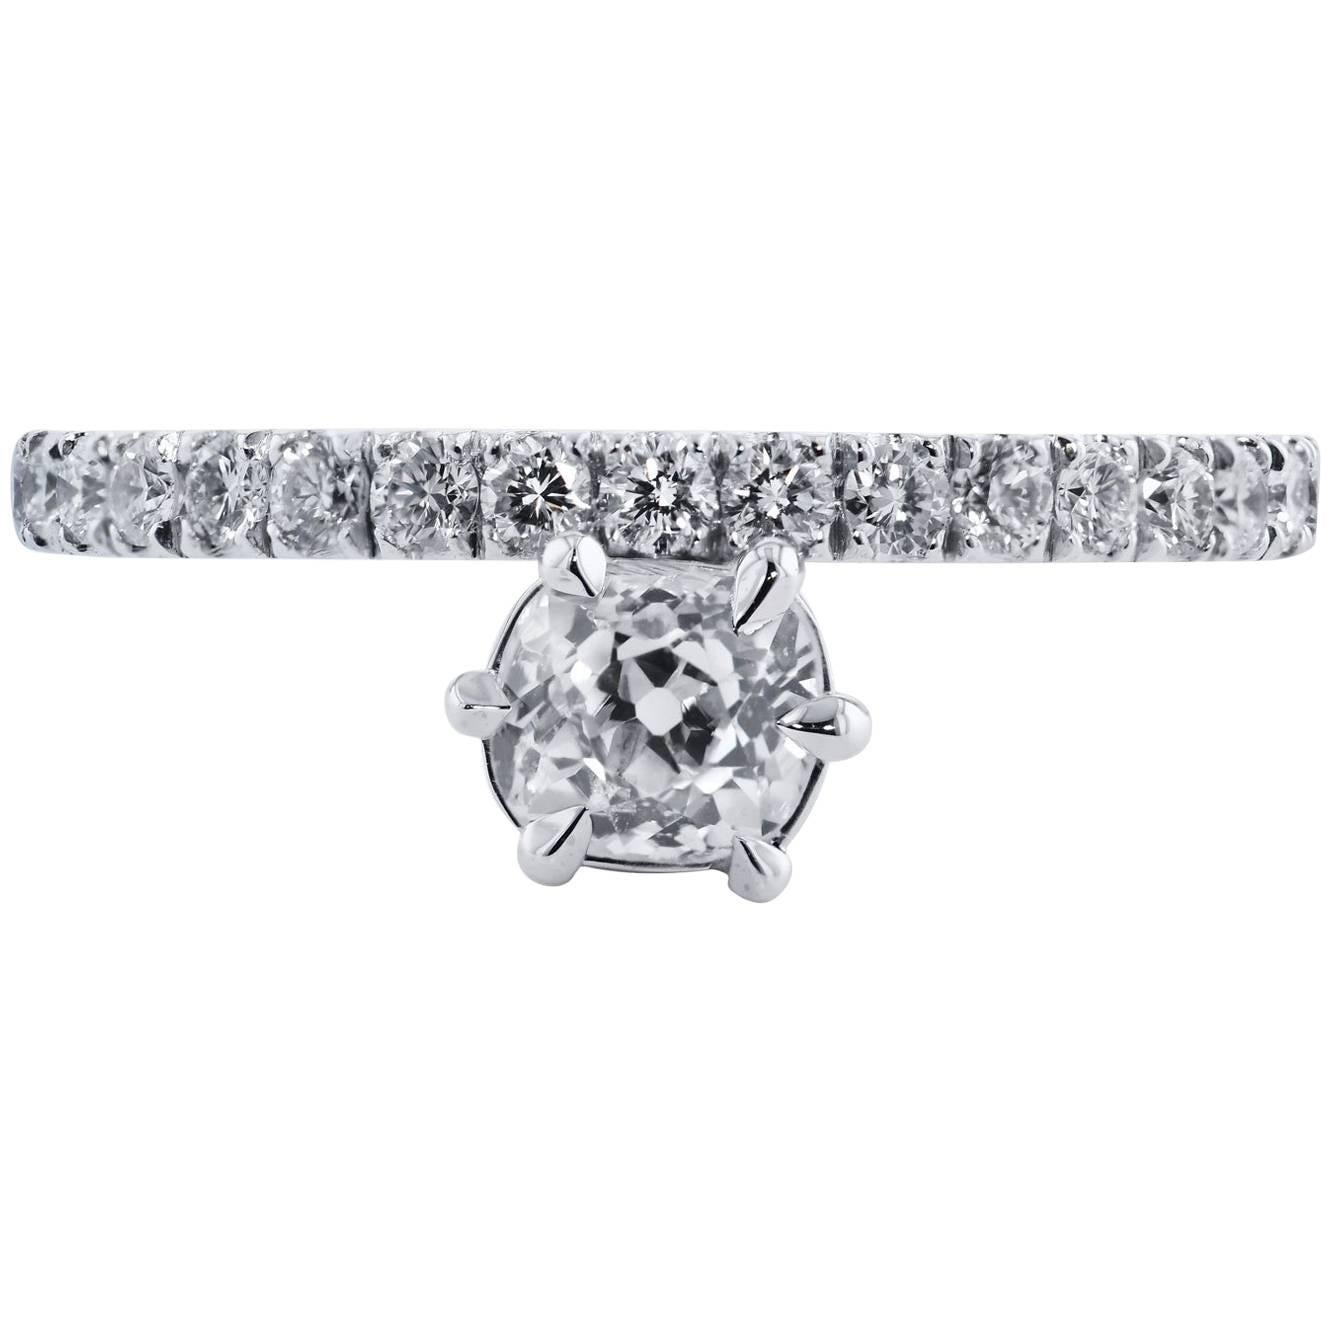 H&H 0.61 Carat Solitaire Antique Cushion Cut Diamond with Pave Band Ring 6.5